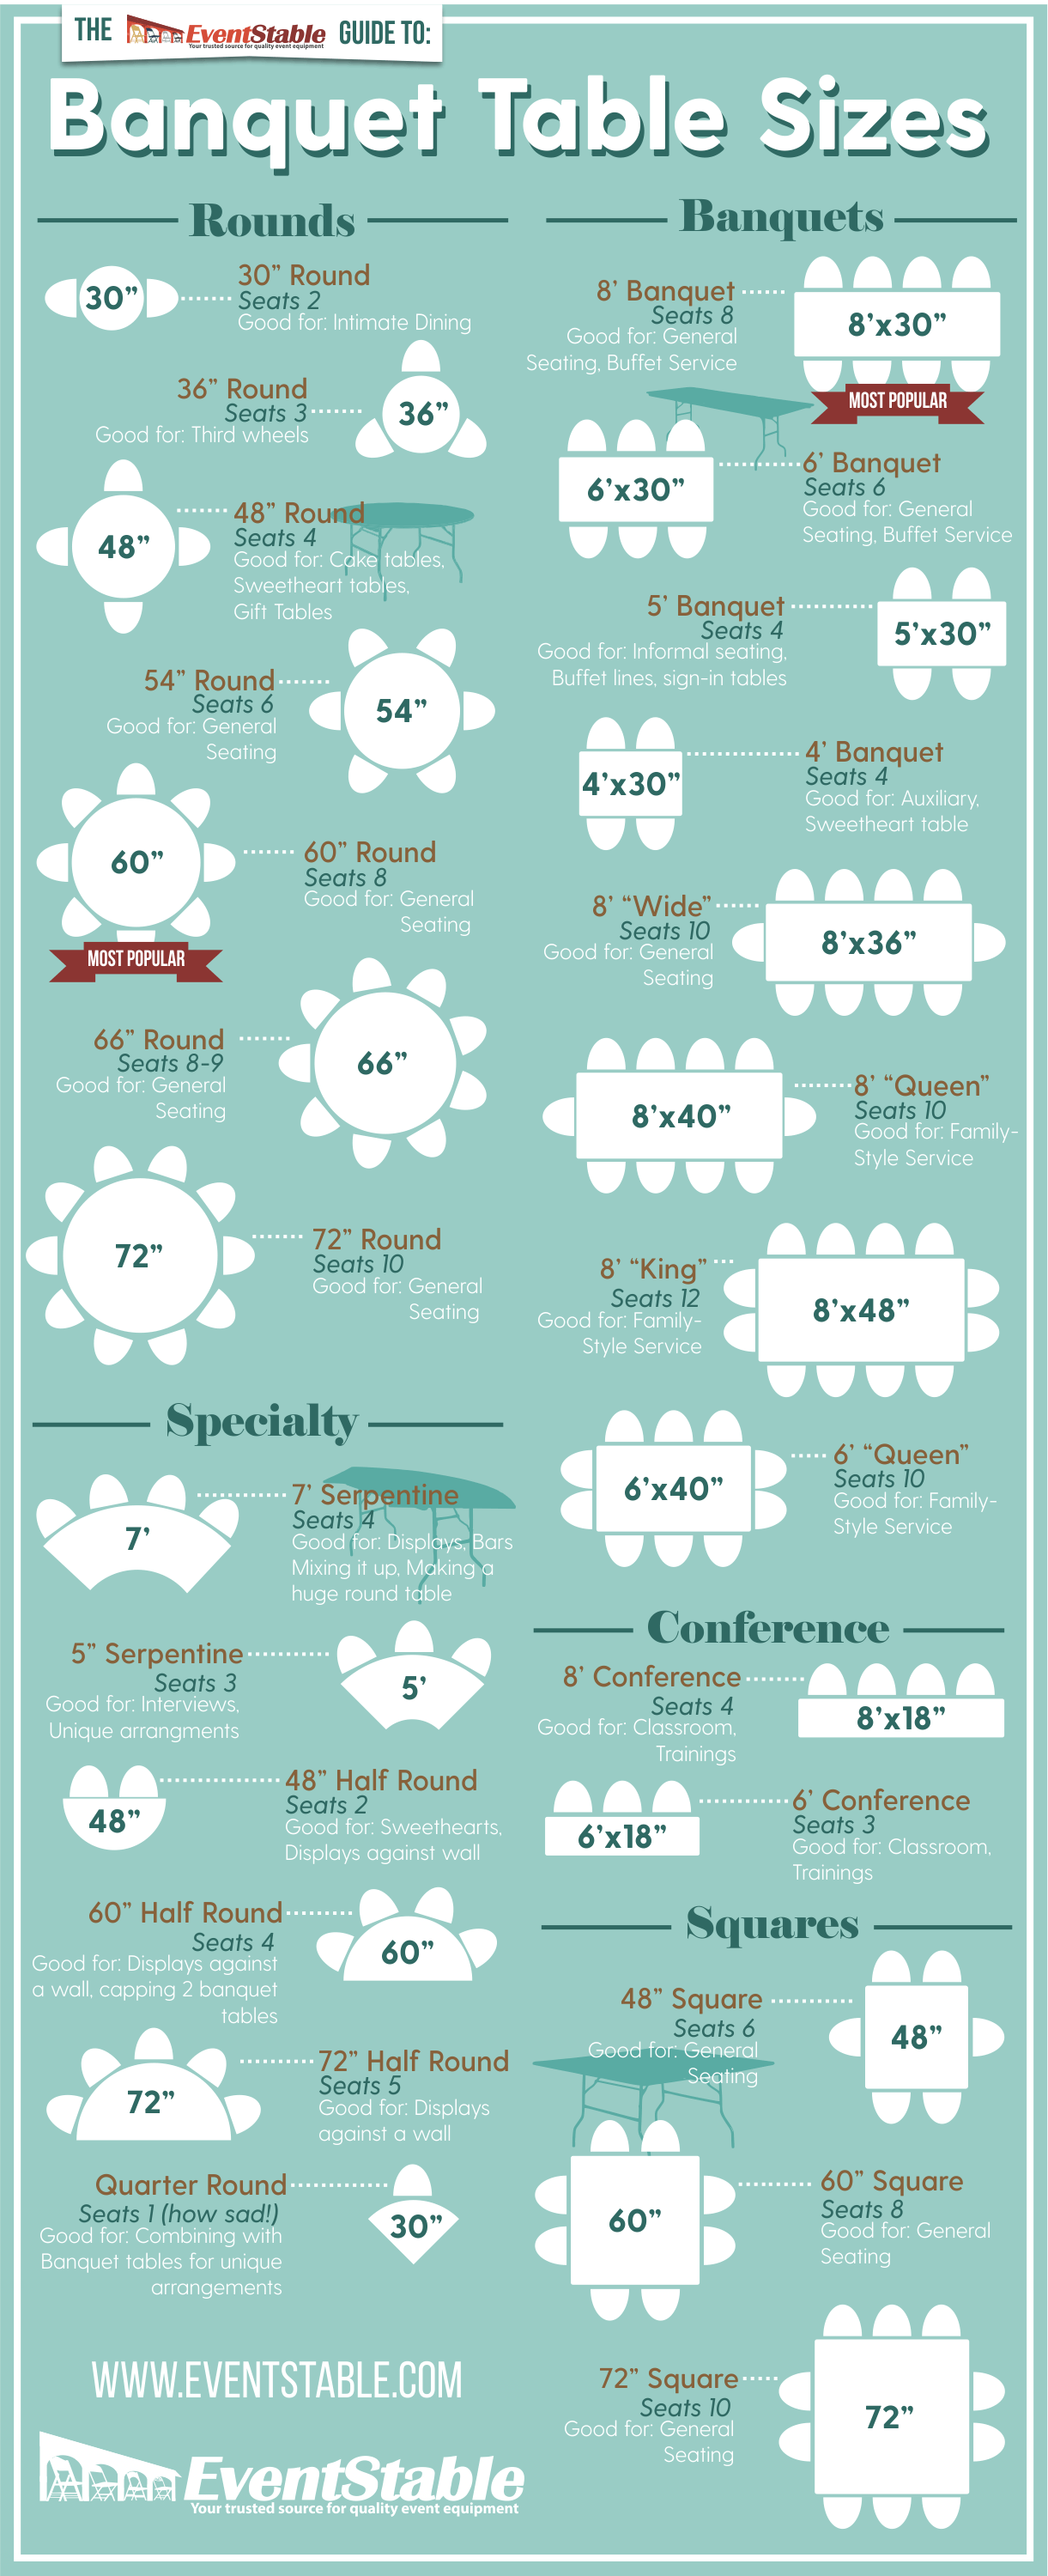 Banquet Table Sizes Infographic Portal, What Is The Average Size Of A Banquet Table